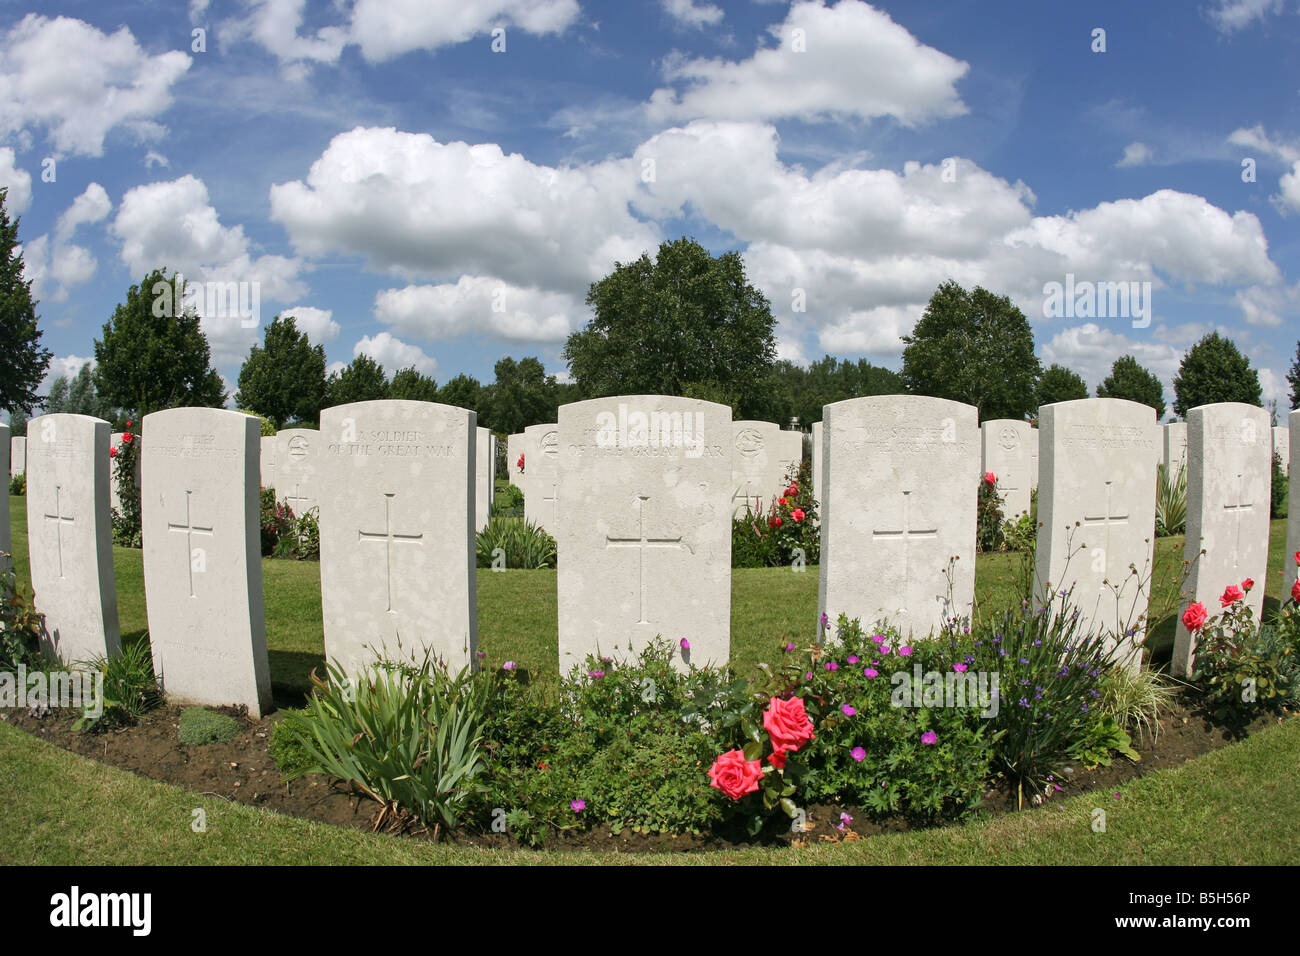 Headstones in a First World War Cemetery. Stock Photo